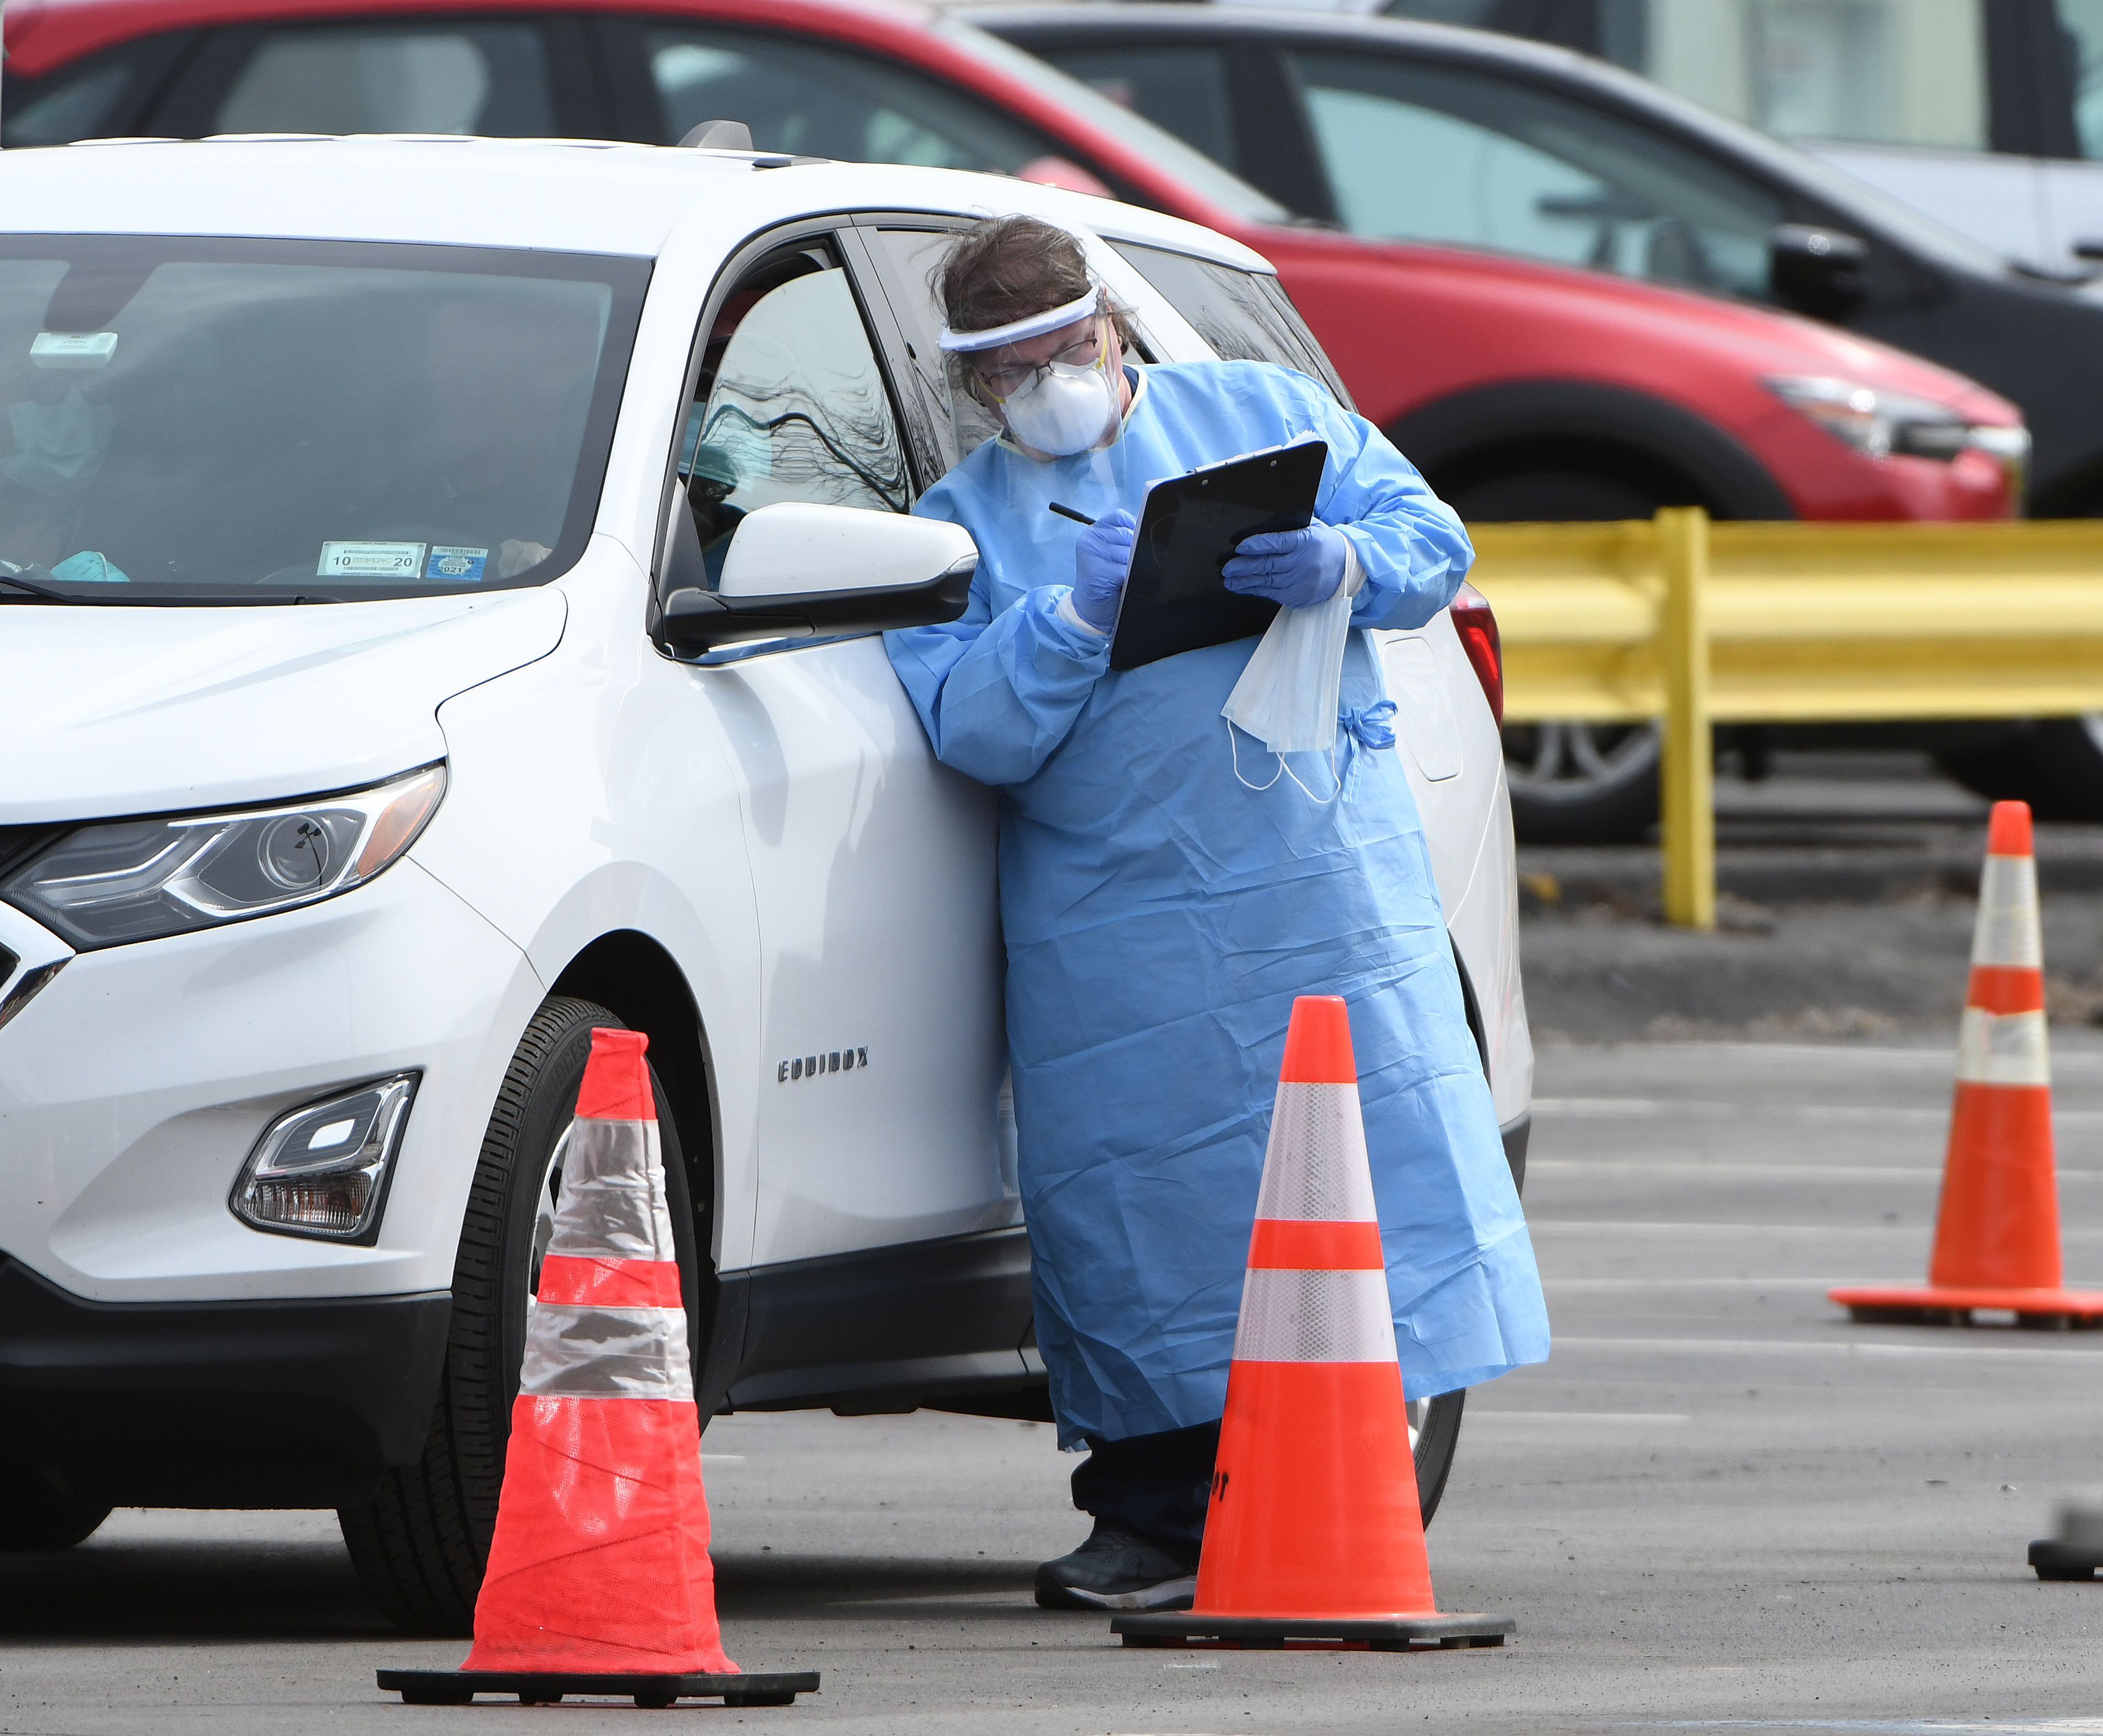 A medical worker in protective gear speaks with a patient in a car